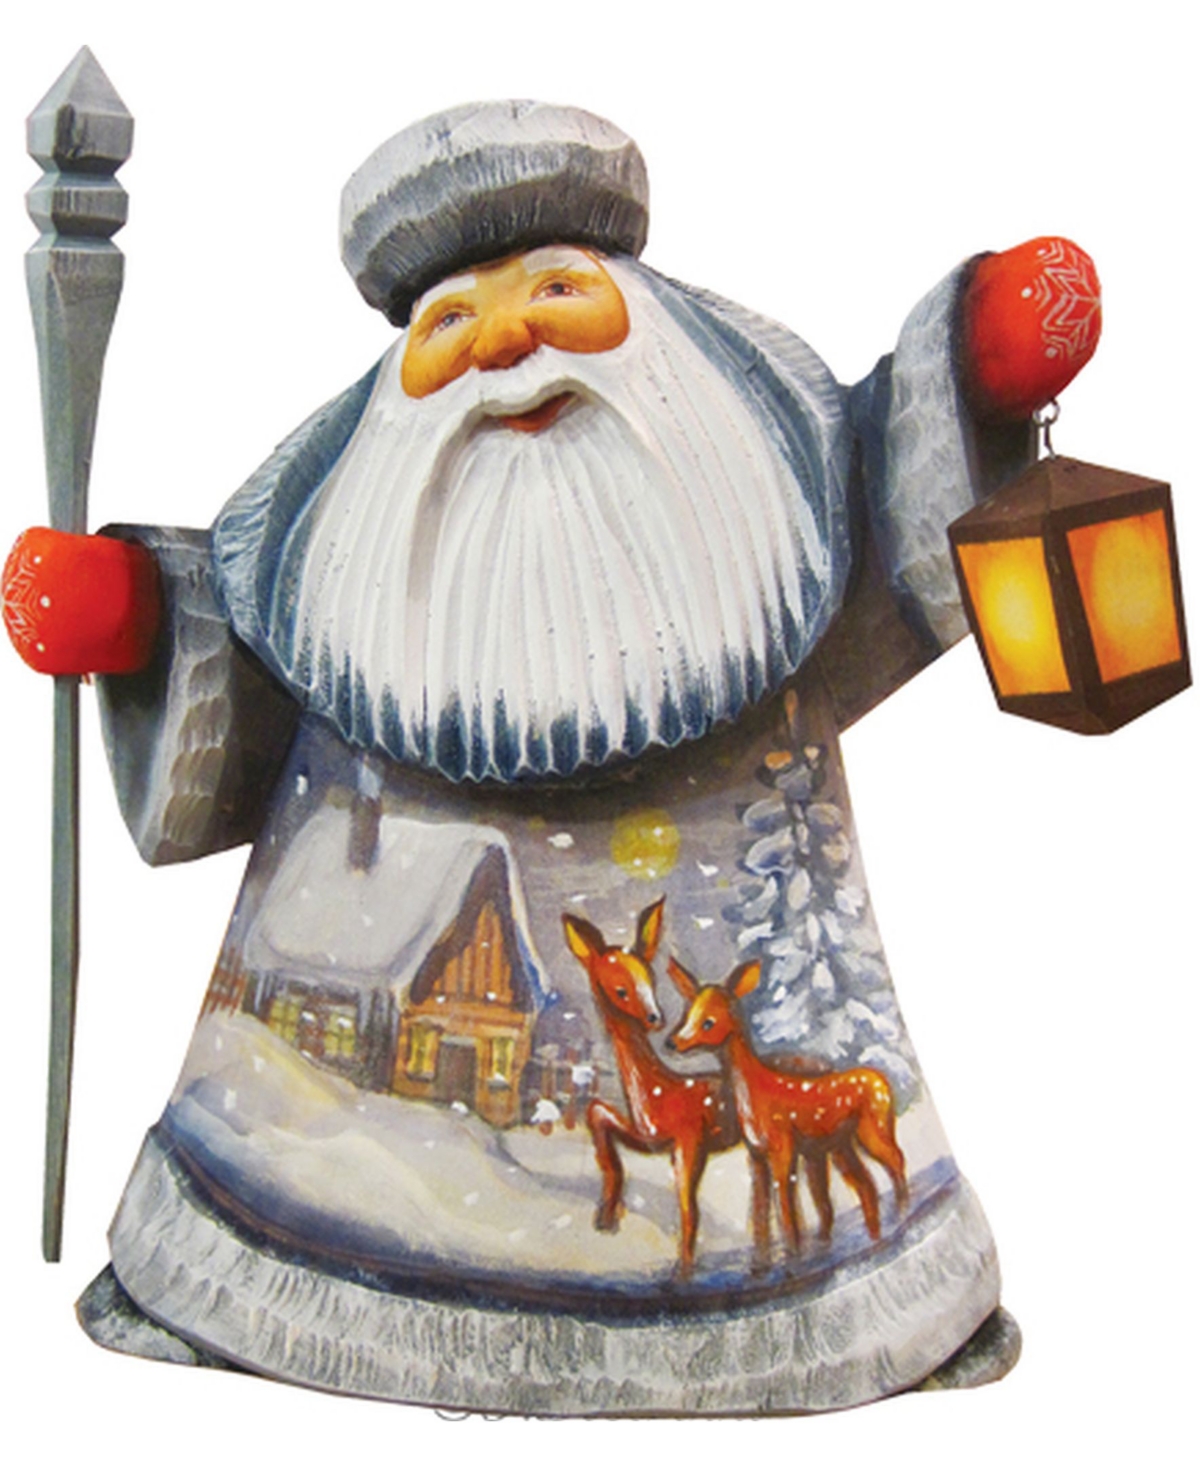 Woodcarved and Hand Painted Santa Kind Dears Father Frost Figurine - Multi